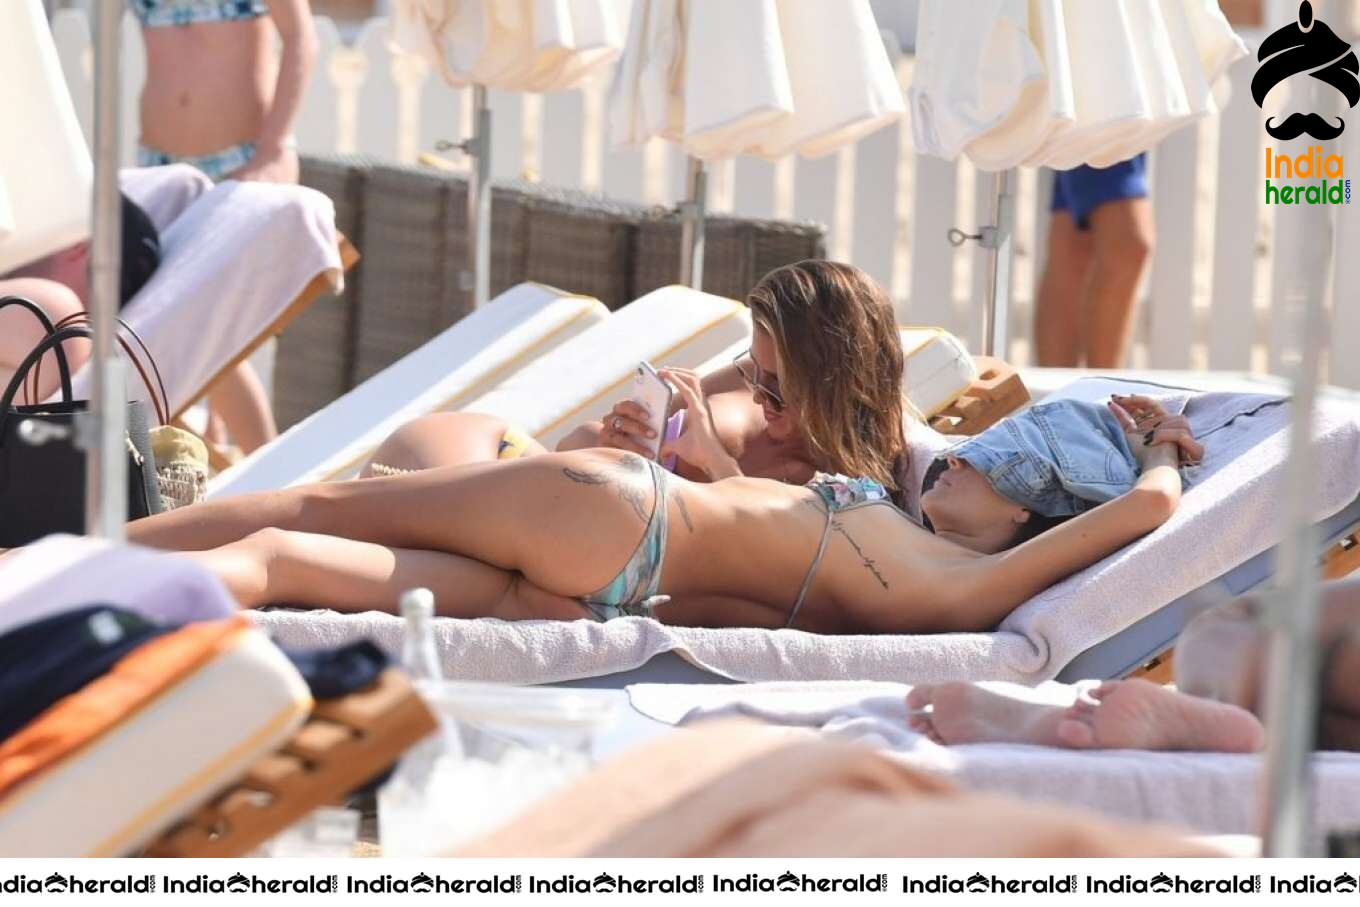 Maggie Quigley caught in Bikini while enjoying out in St Tropez